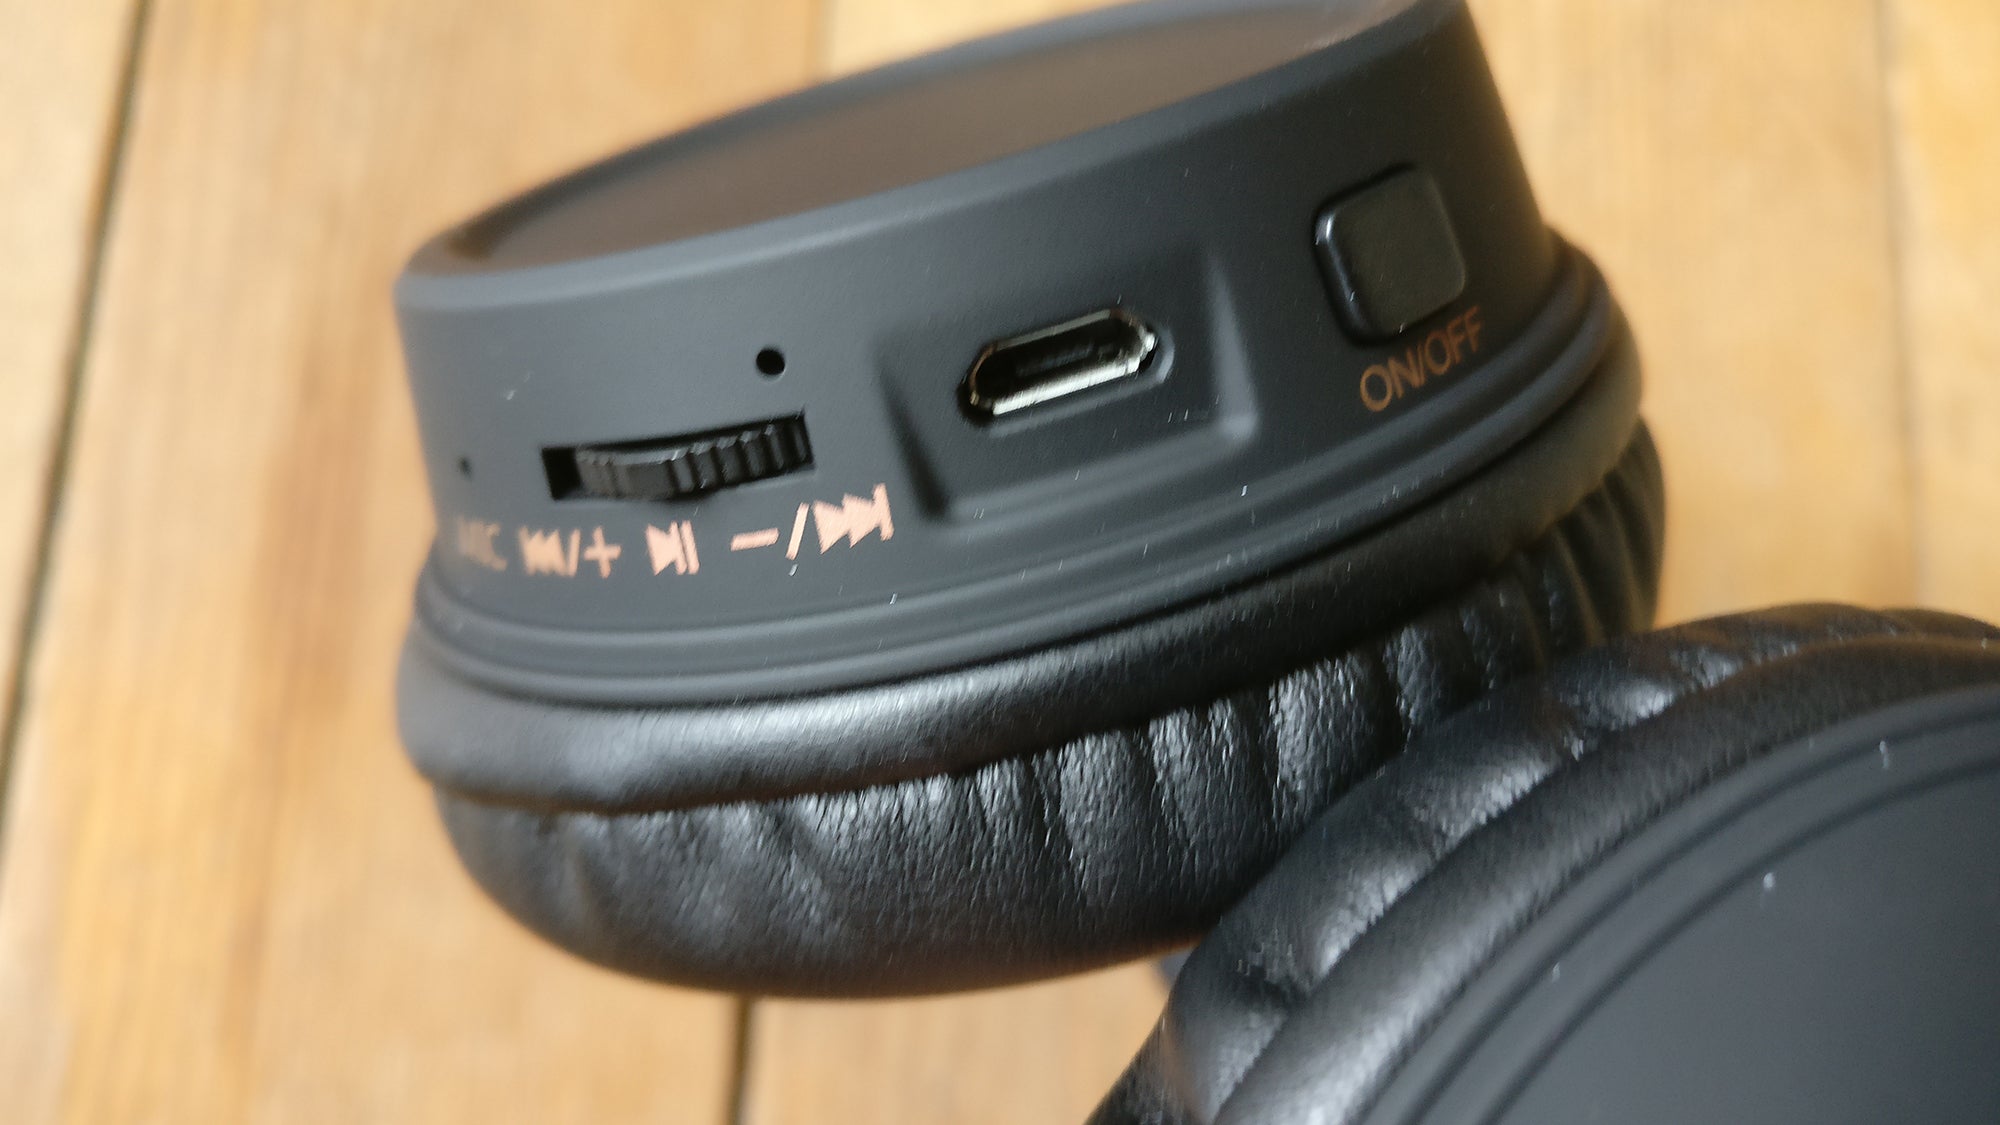 Close-up of KitSound Harlem headphones control buttons and ports